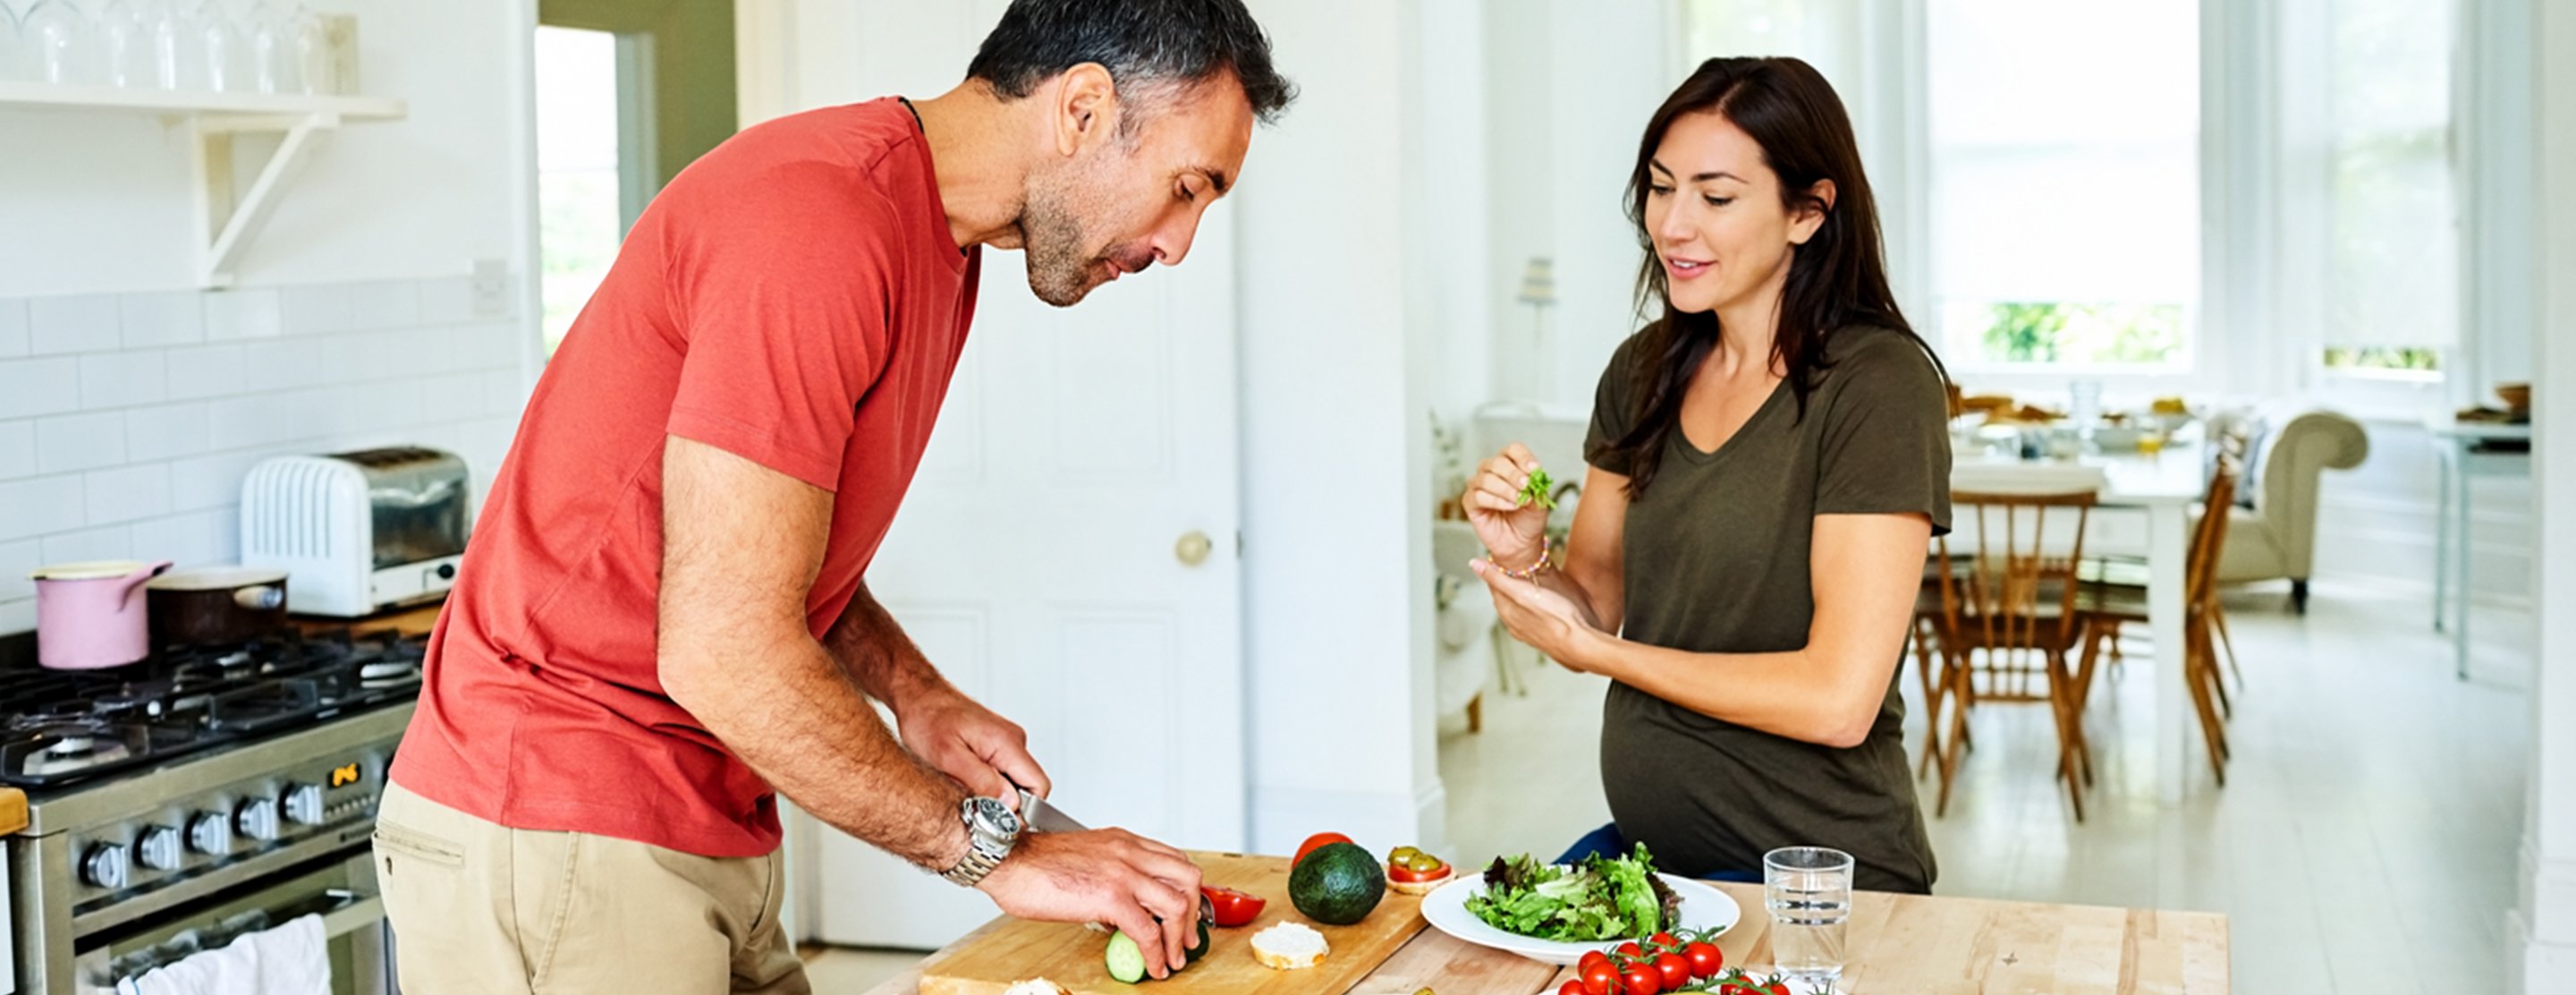 https://www.ucsfhealth.org/-/media/project/ucsf/ucsf-health/education/hero/diabetes-during-pregnancy-diet-tips-2x.jpg?h=1112&iar=0&w=2880&hash=4263C9B9AD37F17C4C969E7065A5DC1D